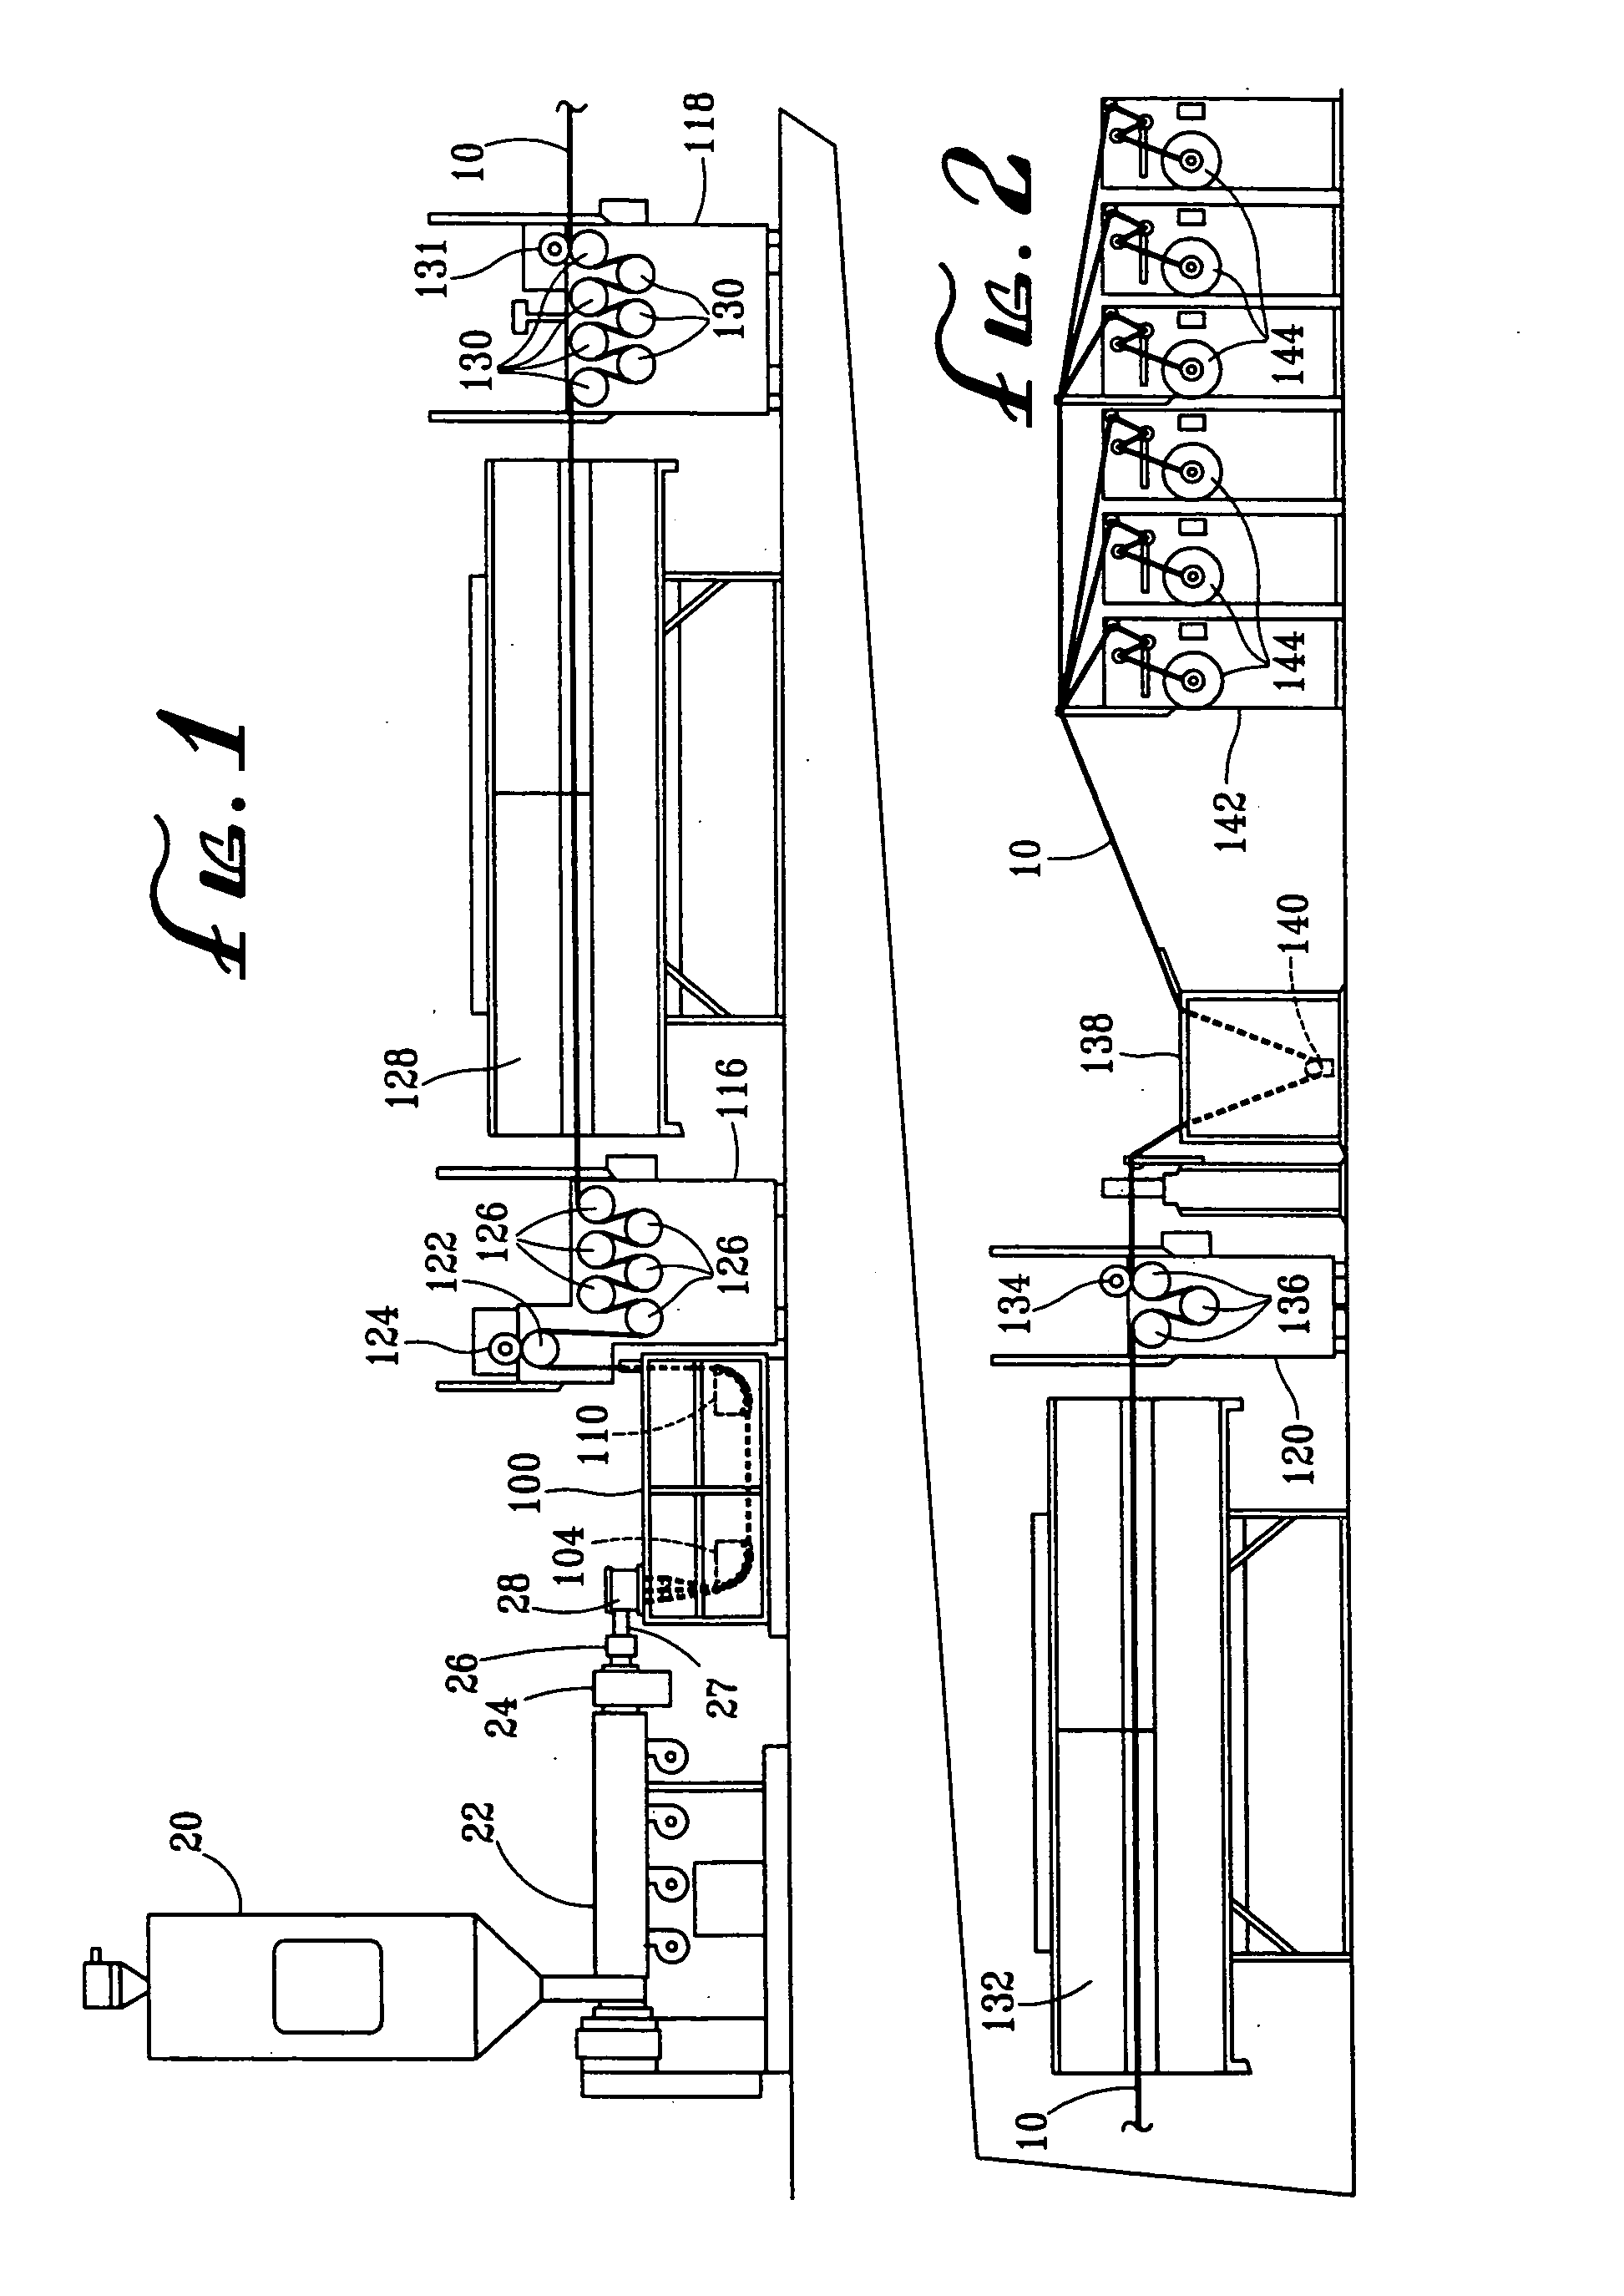 Method of manufacturing noise attenuating flexible cutting line for use in rotary vegetation trimmers